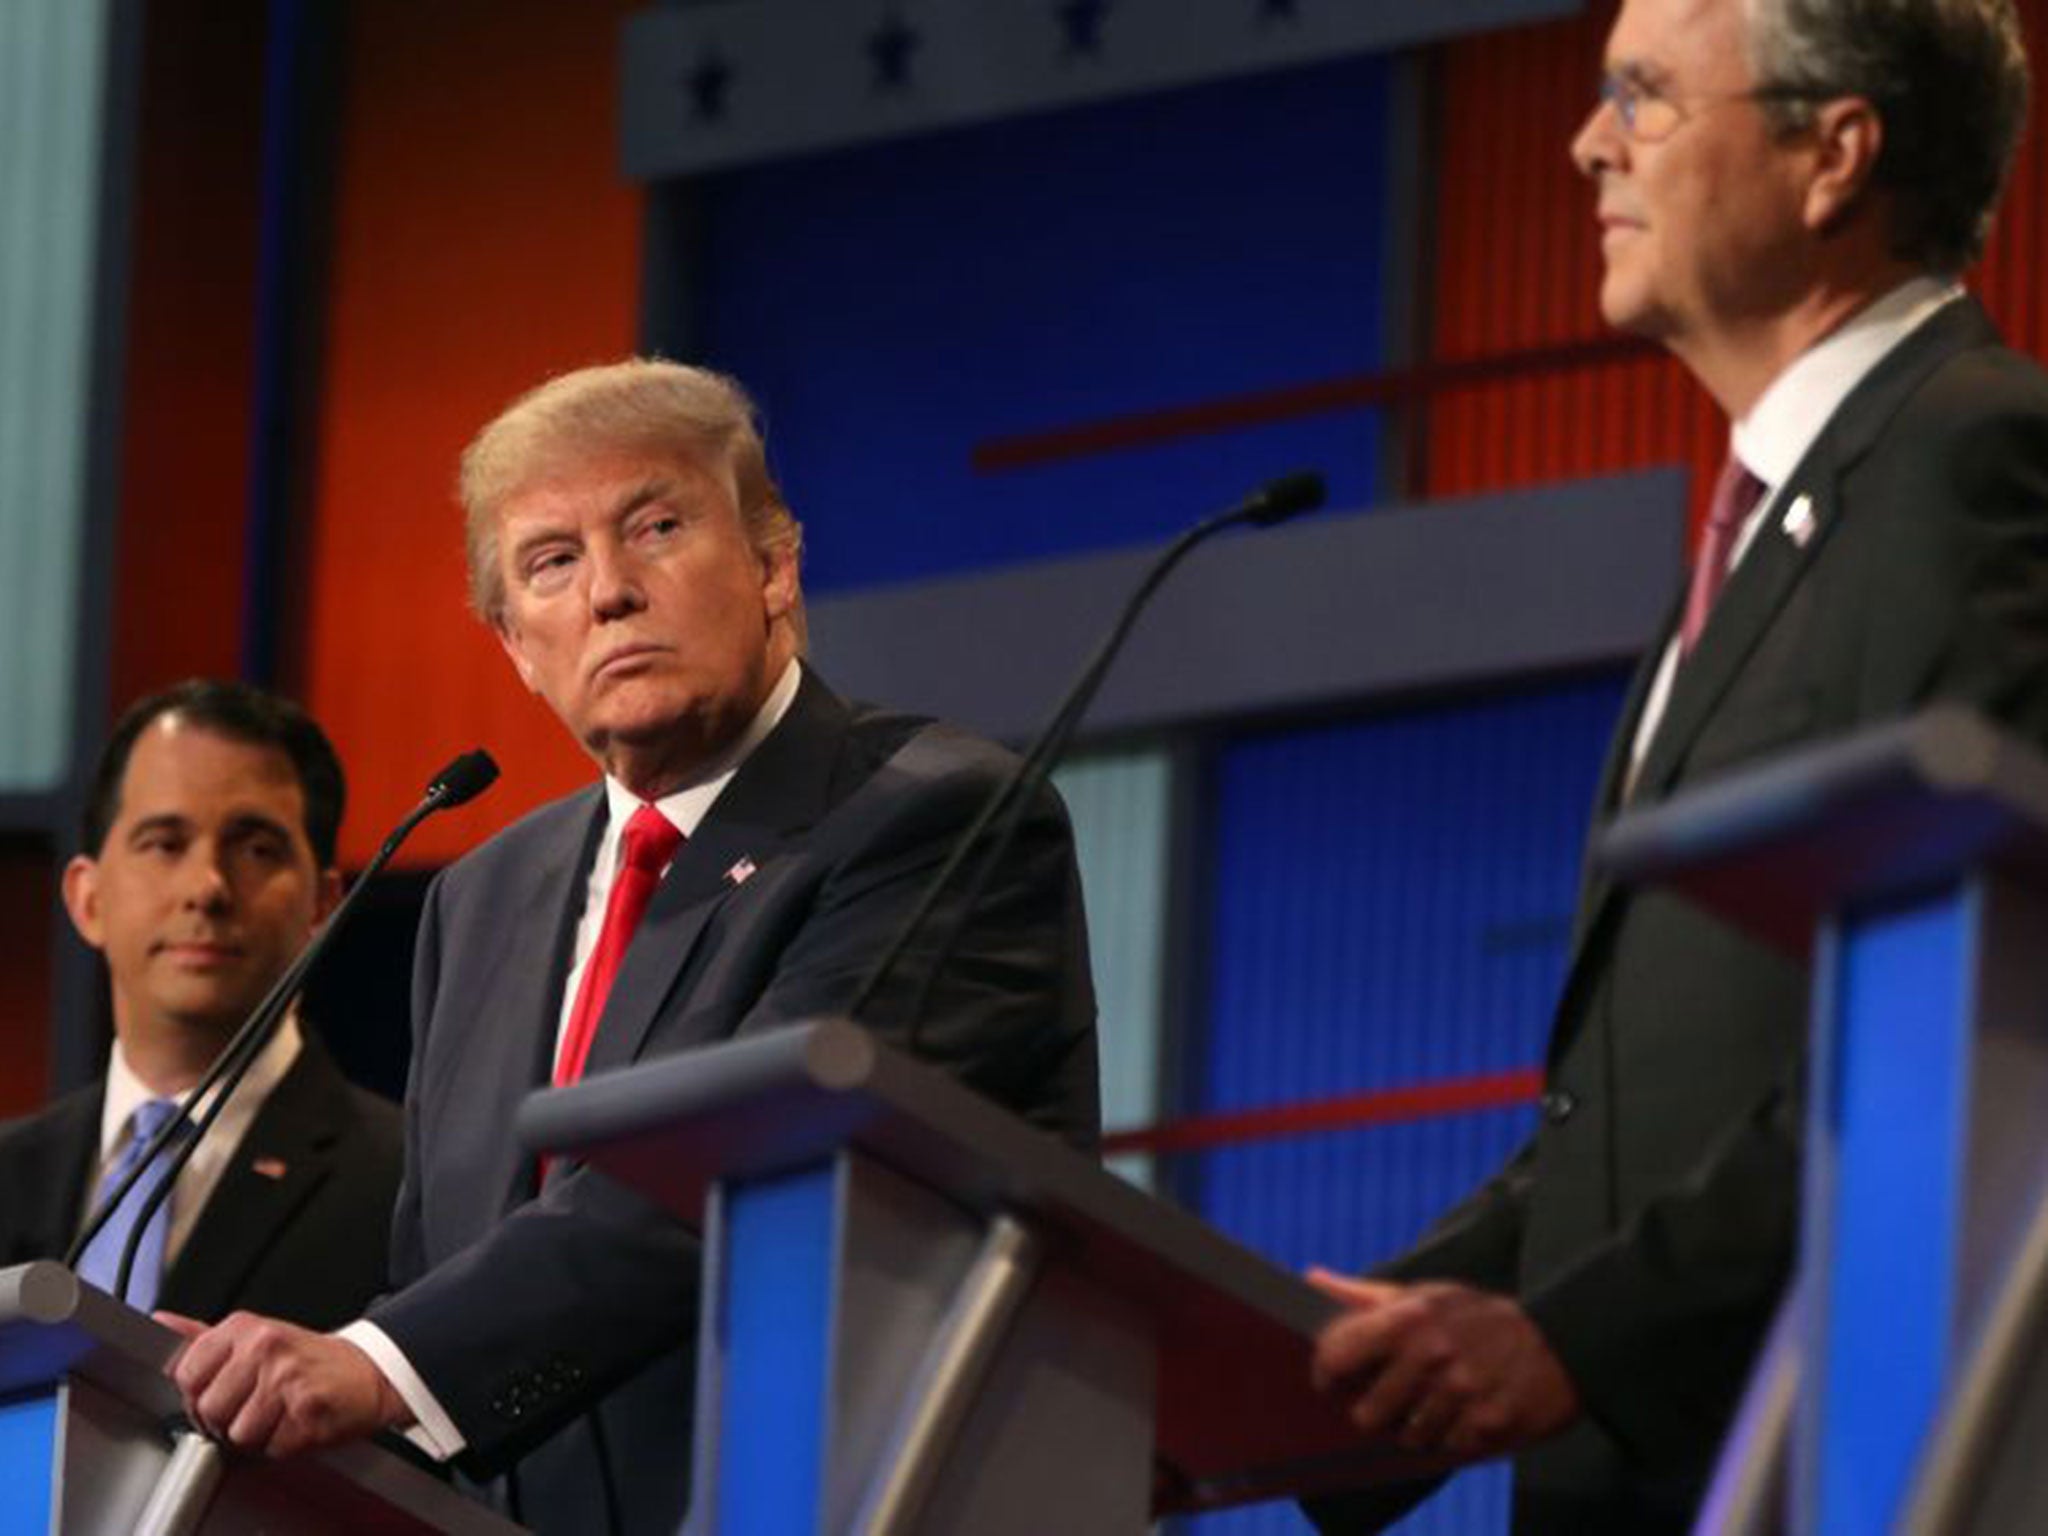 Republican presidential candidate Donald Trump looks toward Jeb Bush, right, as Scott Walker watches during the first Republican presidential debate